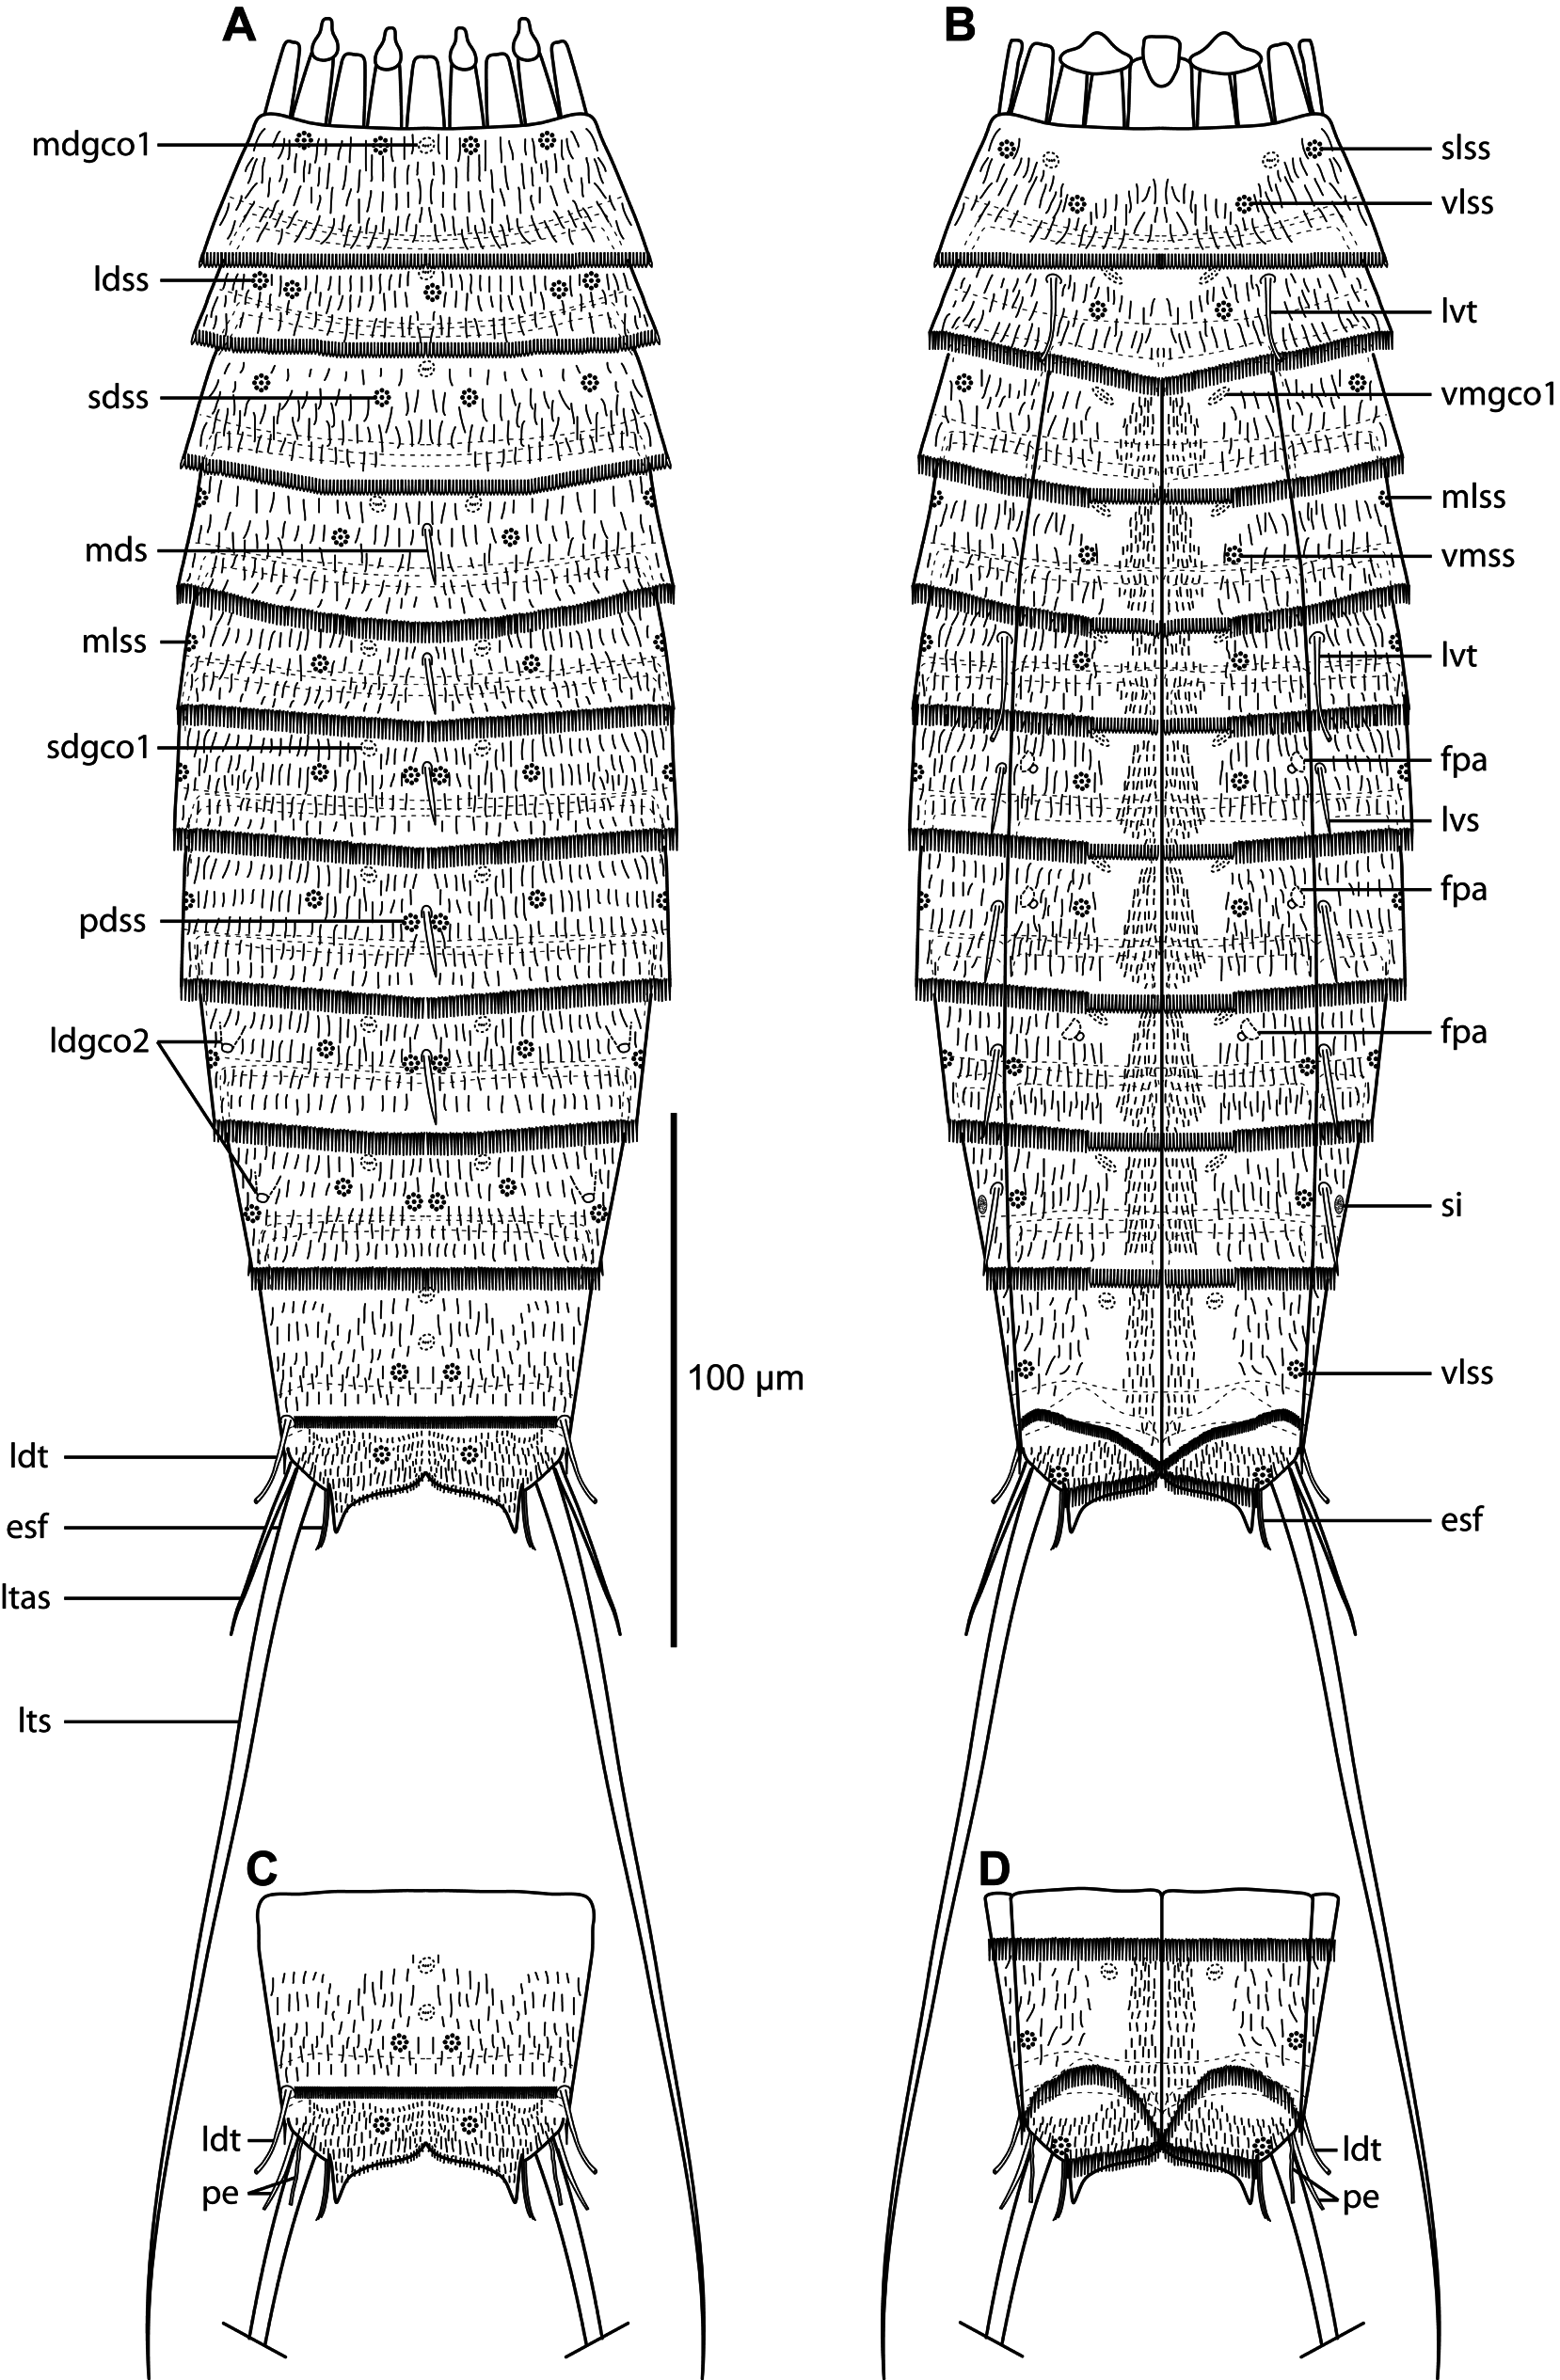 Diagram of mouth cone (gray area), introvert, and placids in